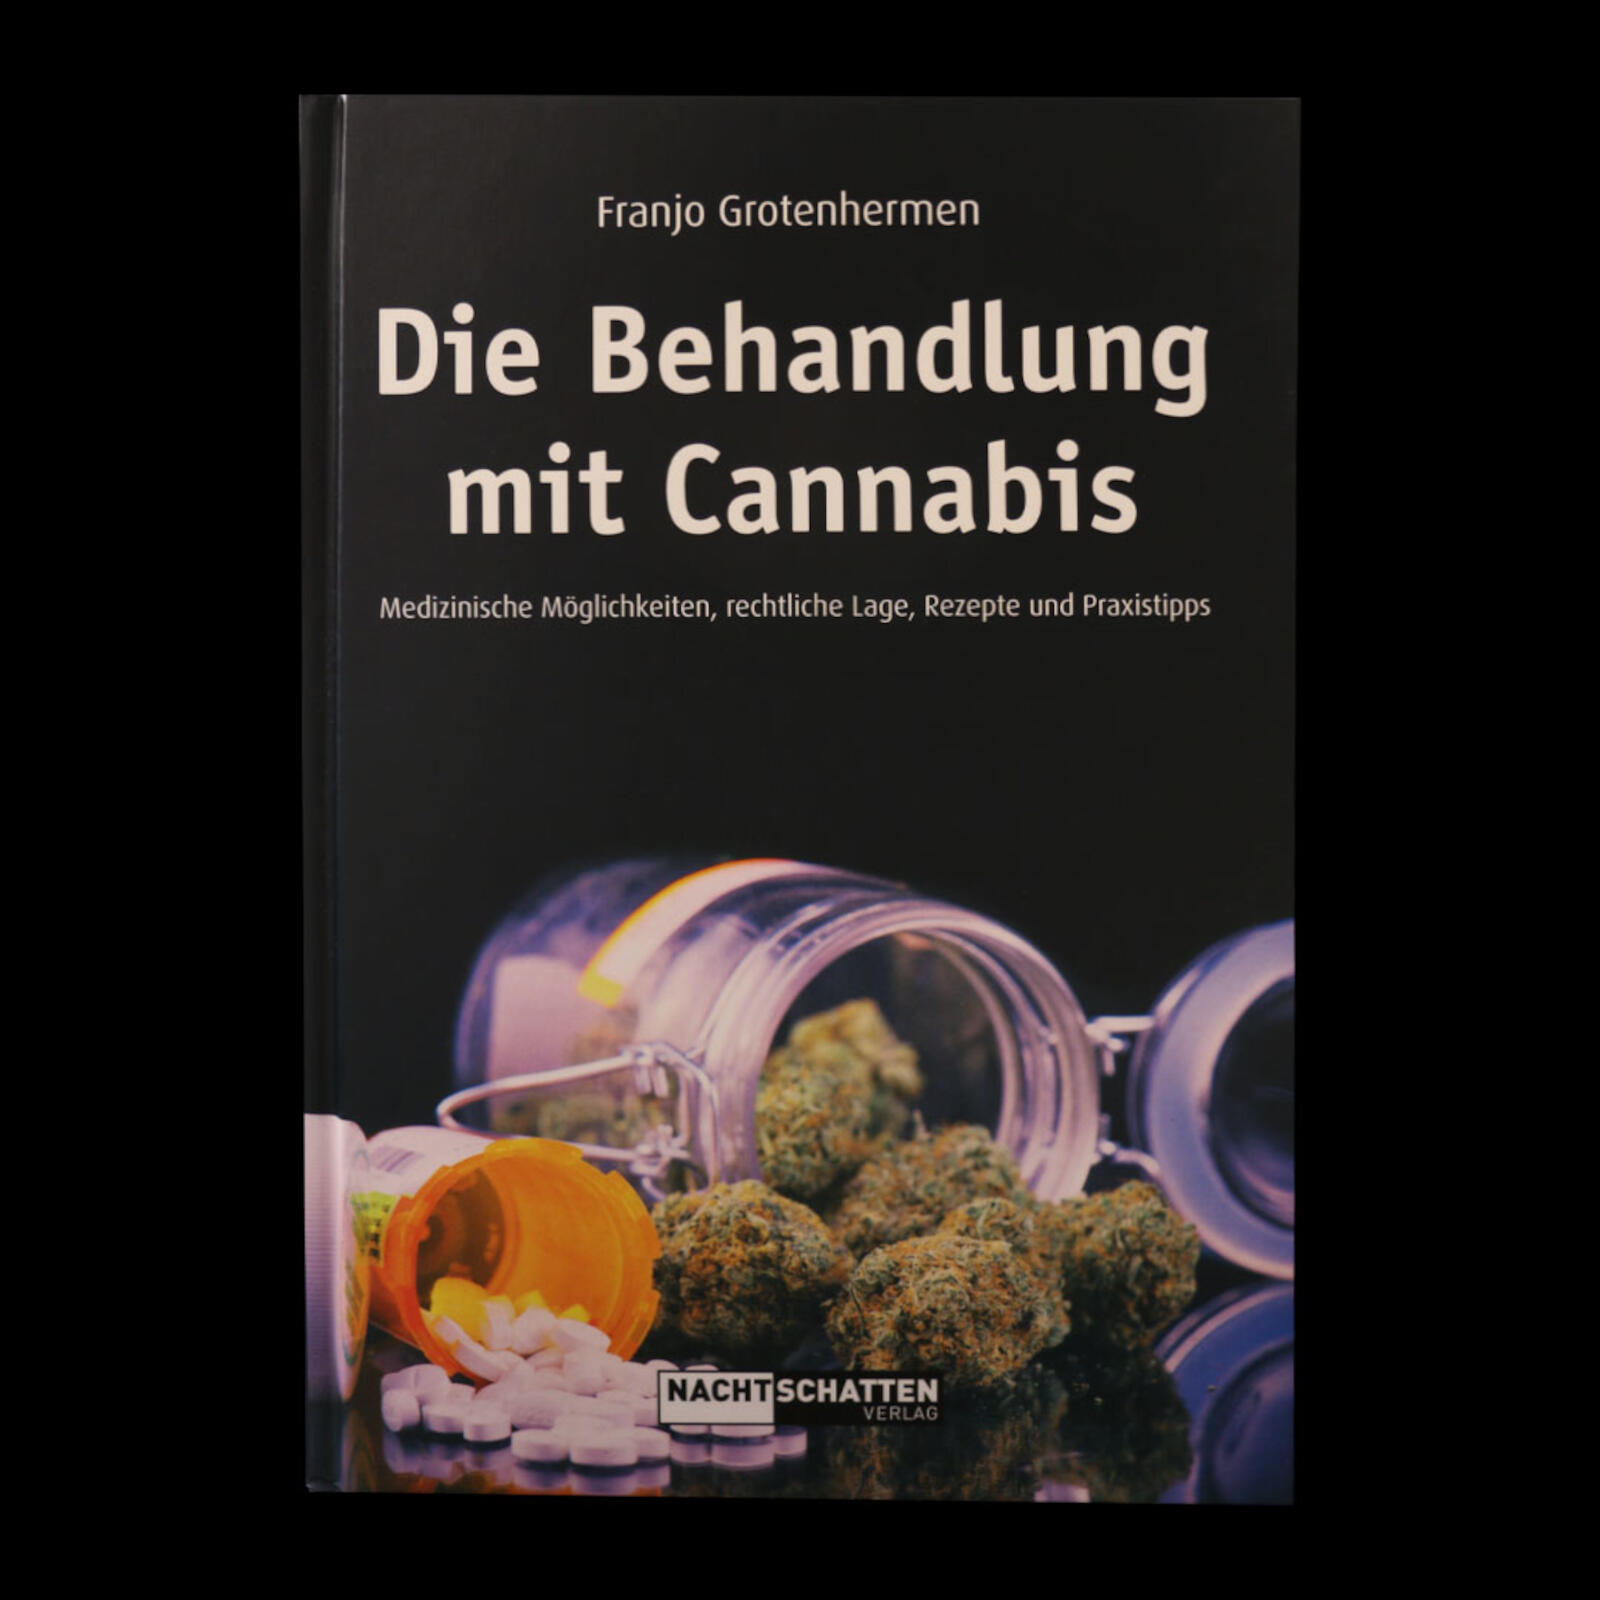 The Treatment with Cannabis